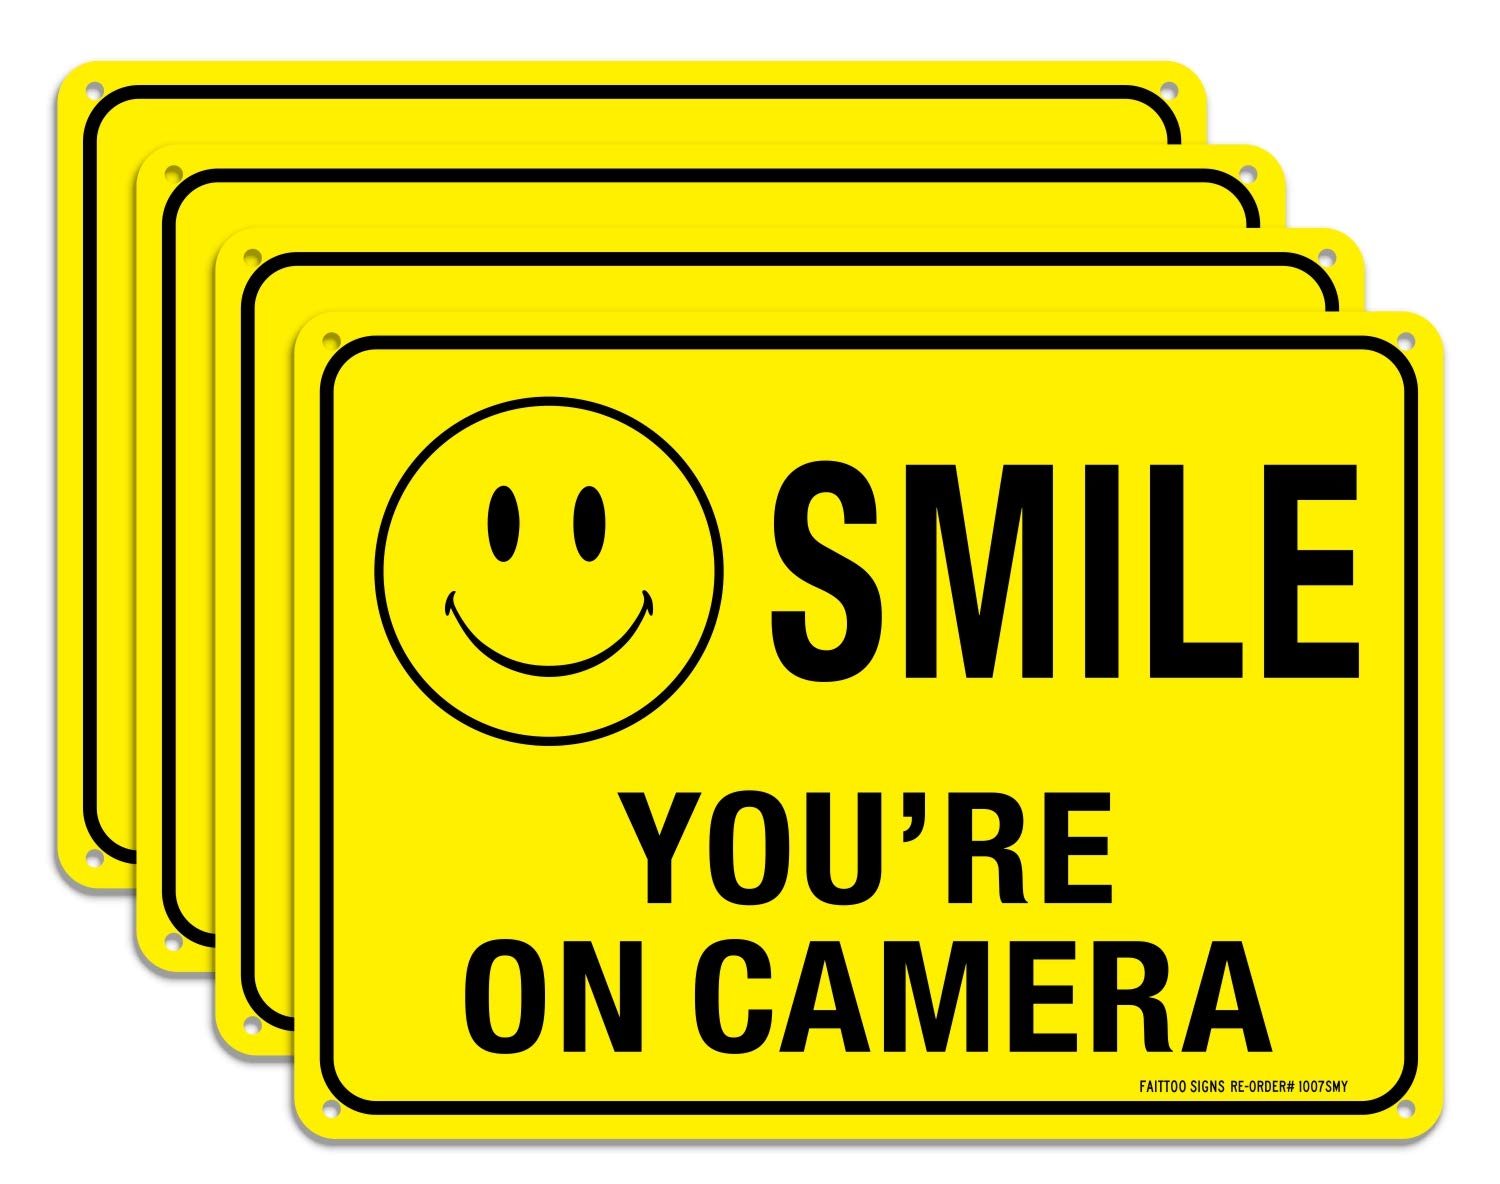 (4 Pack) Faittoo Smile You're On Camera Sign, 10x7 Reflective Rust Free .40 Aluminum, UV Protected, Weather Resistant, Durable Ink, Indoor & Outdoor Use for Home Business CCTV Security Camera